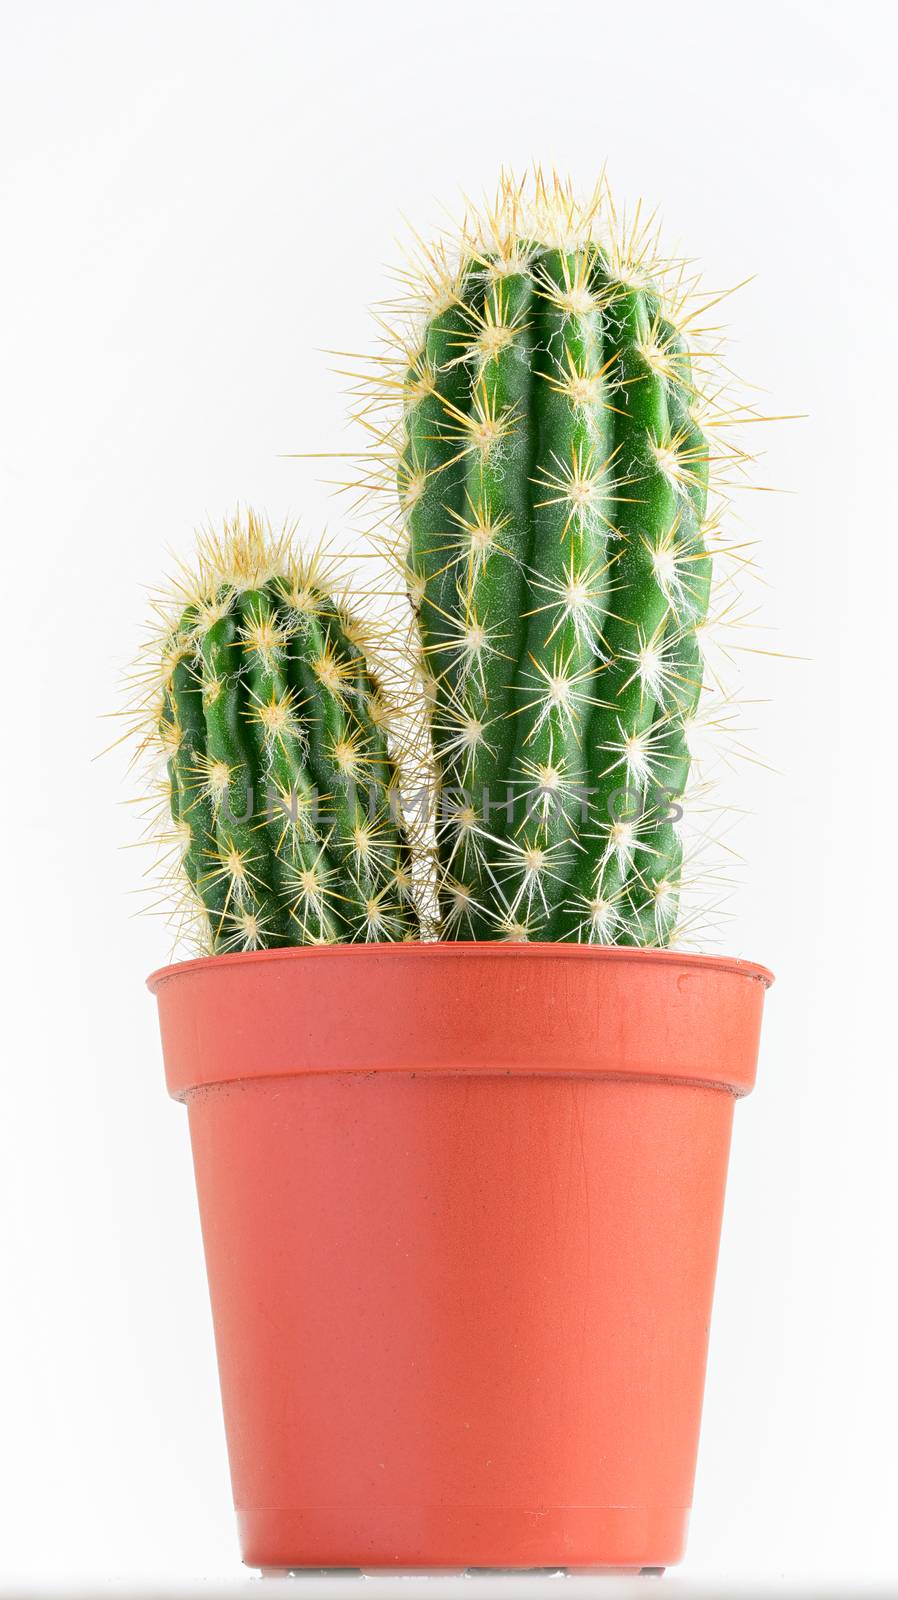 cactus by Visual-Content